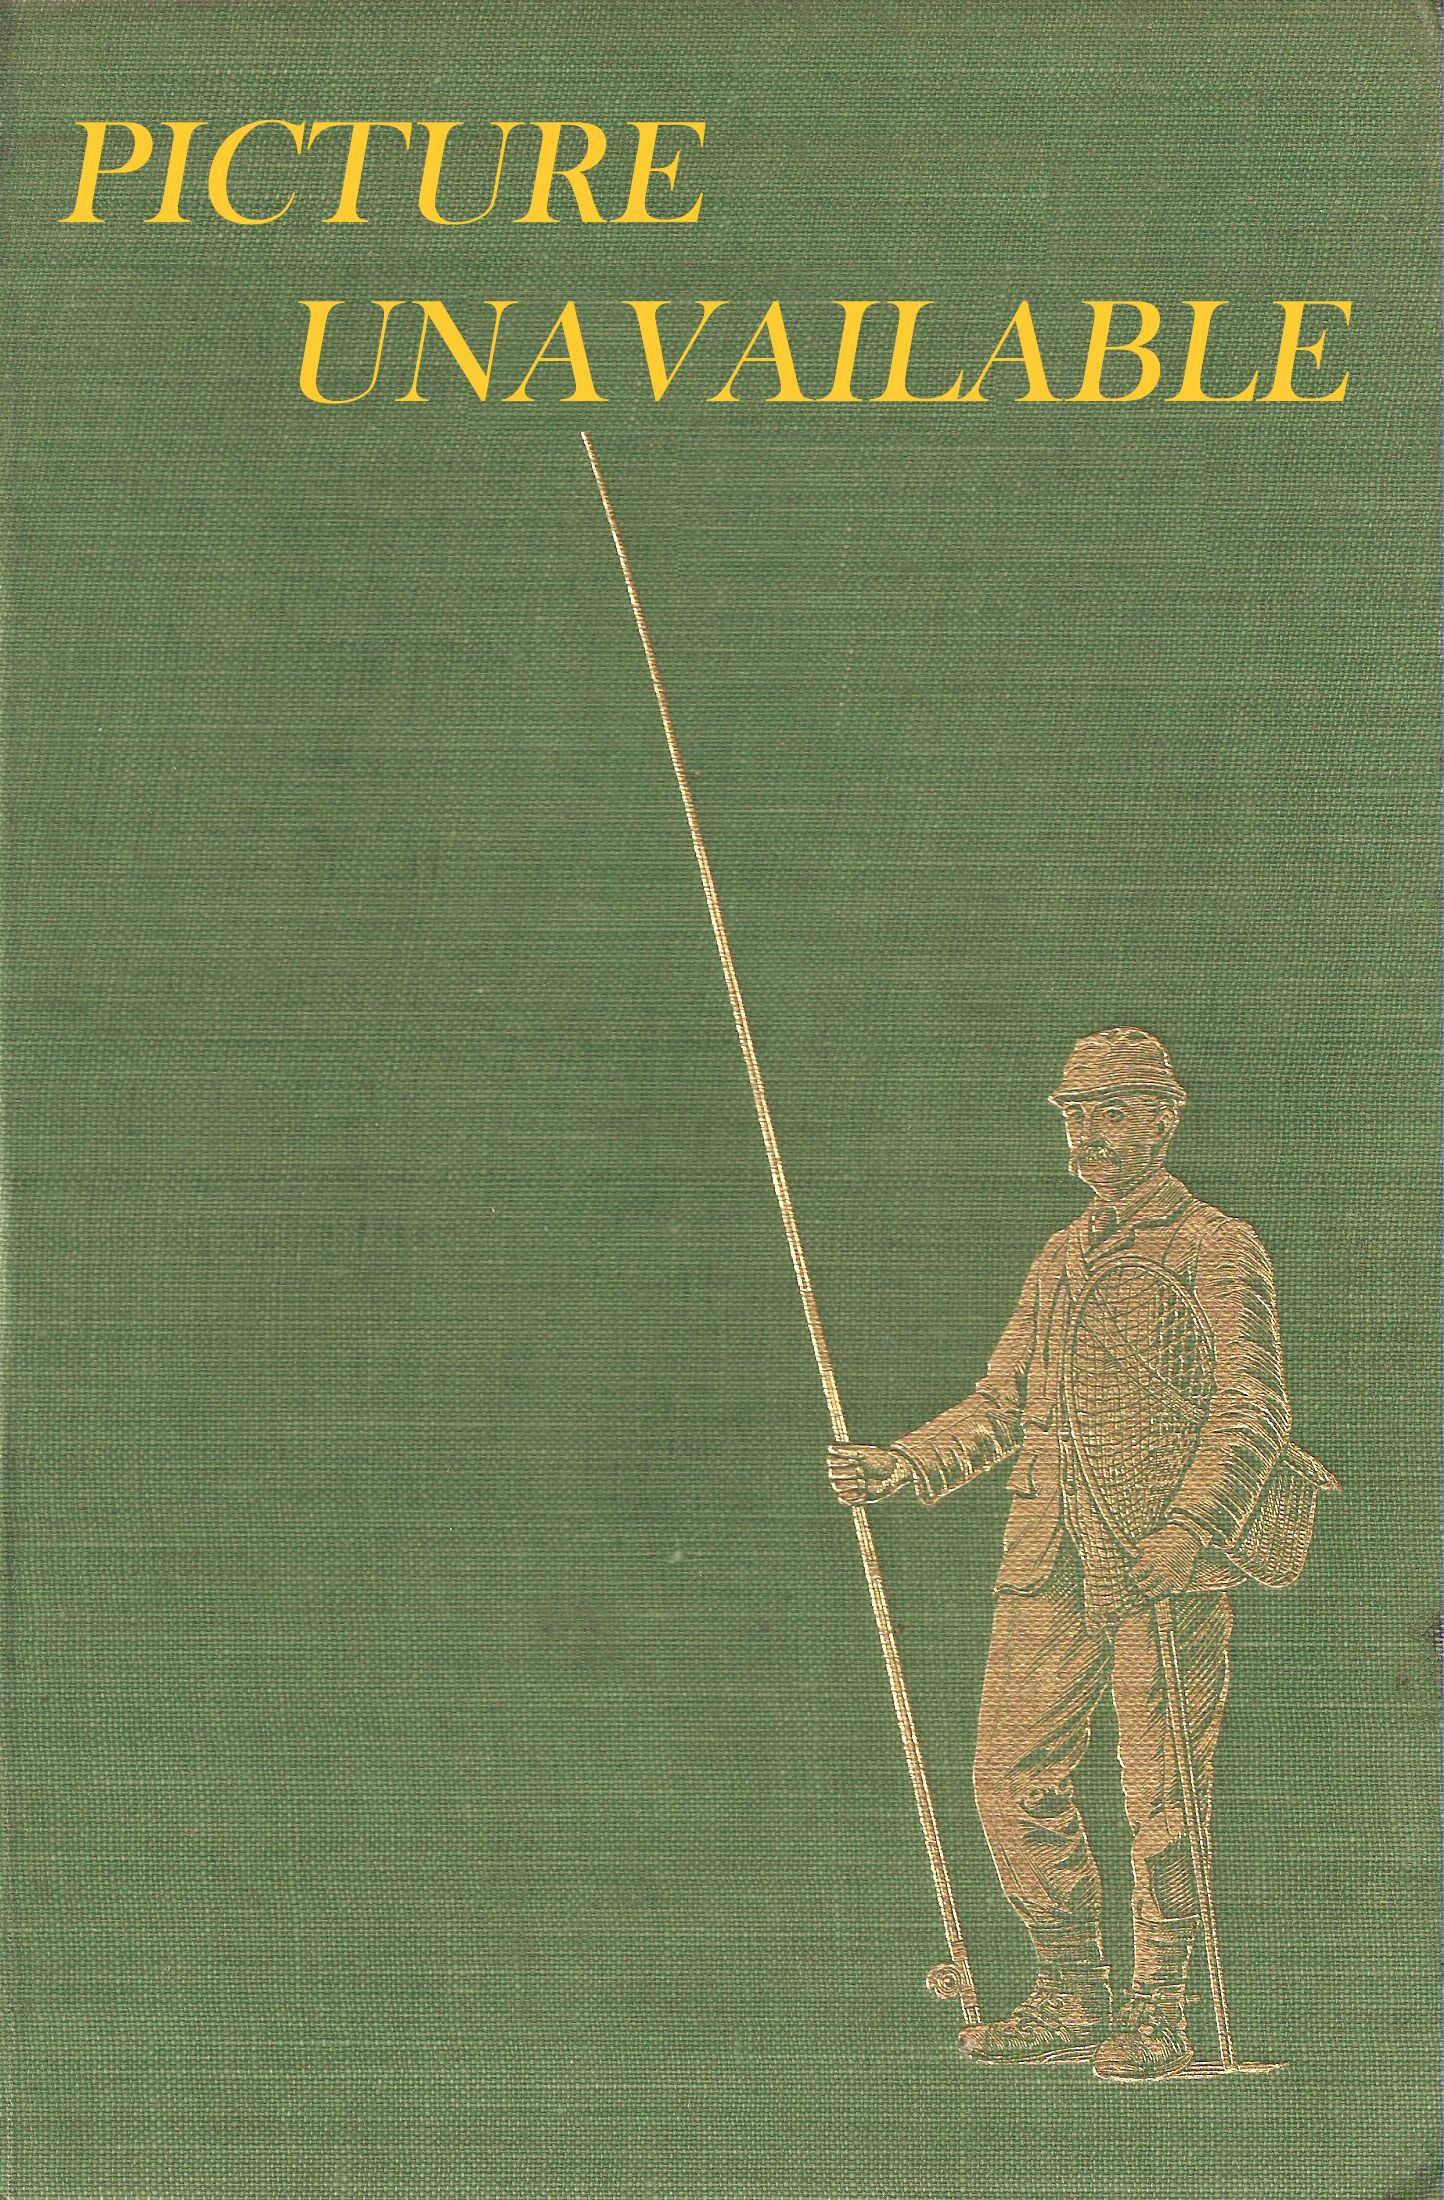 ALIVE ON A RAINY DAY: OR FISHING IS A WAY OF LIFE. REVISED SECOND EDITION.  By Geoffrey Bucknall.